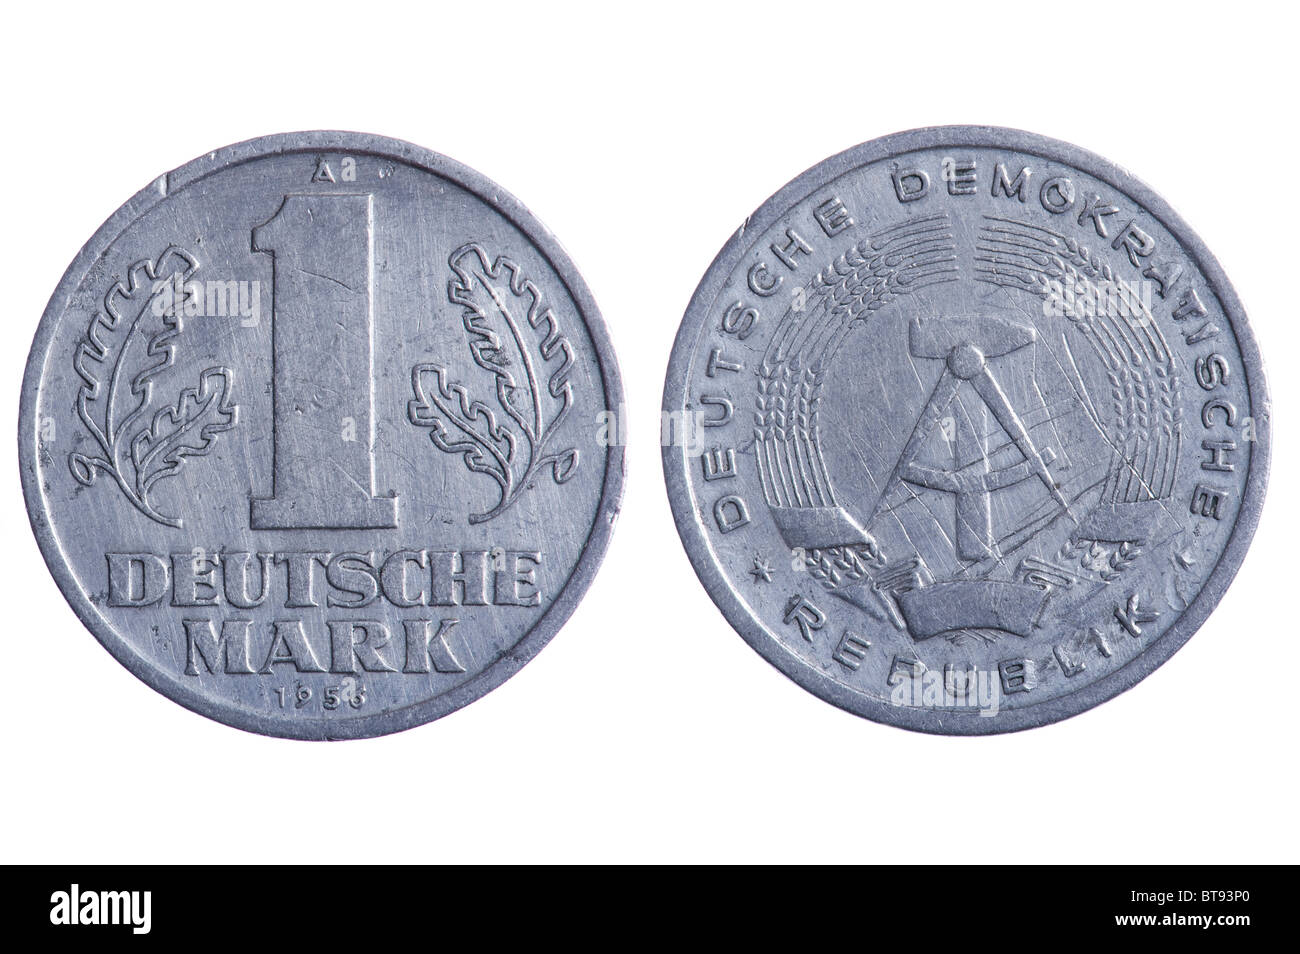 object on white - Deutsche mark coins close up Stock Photo